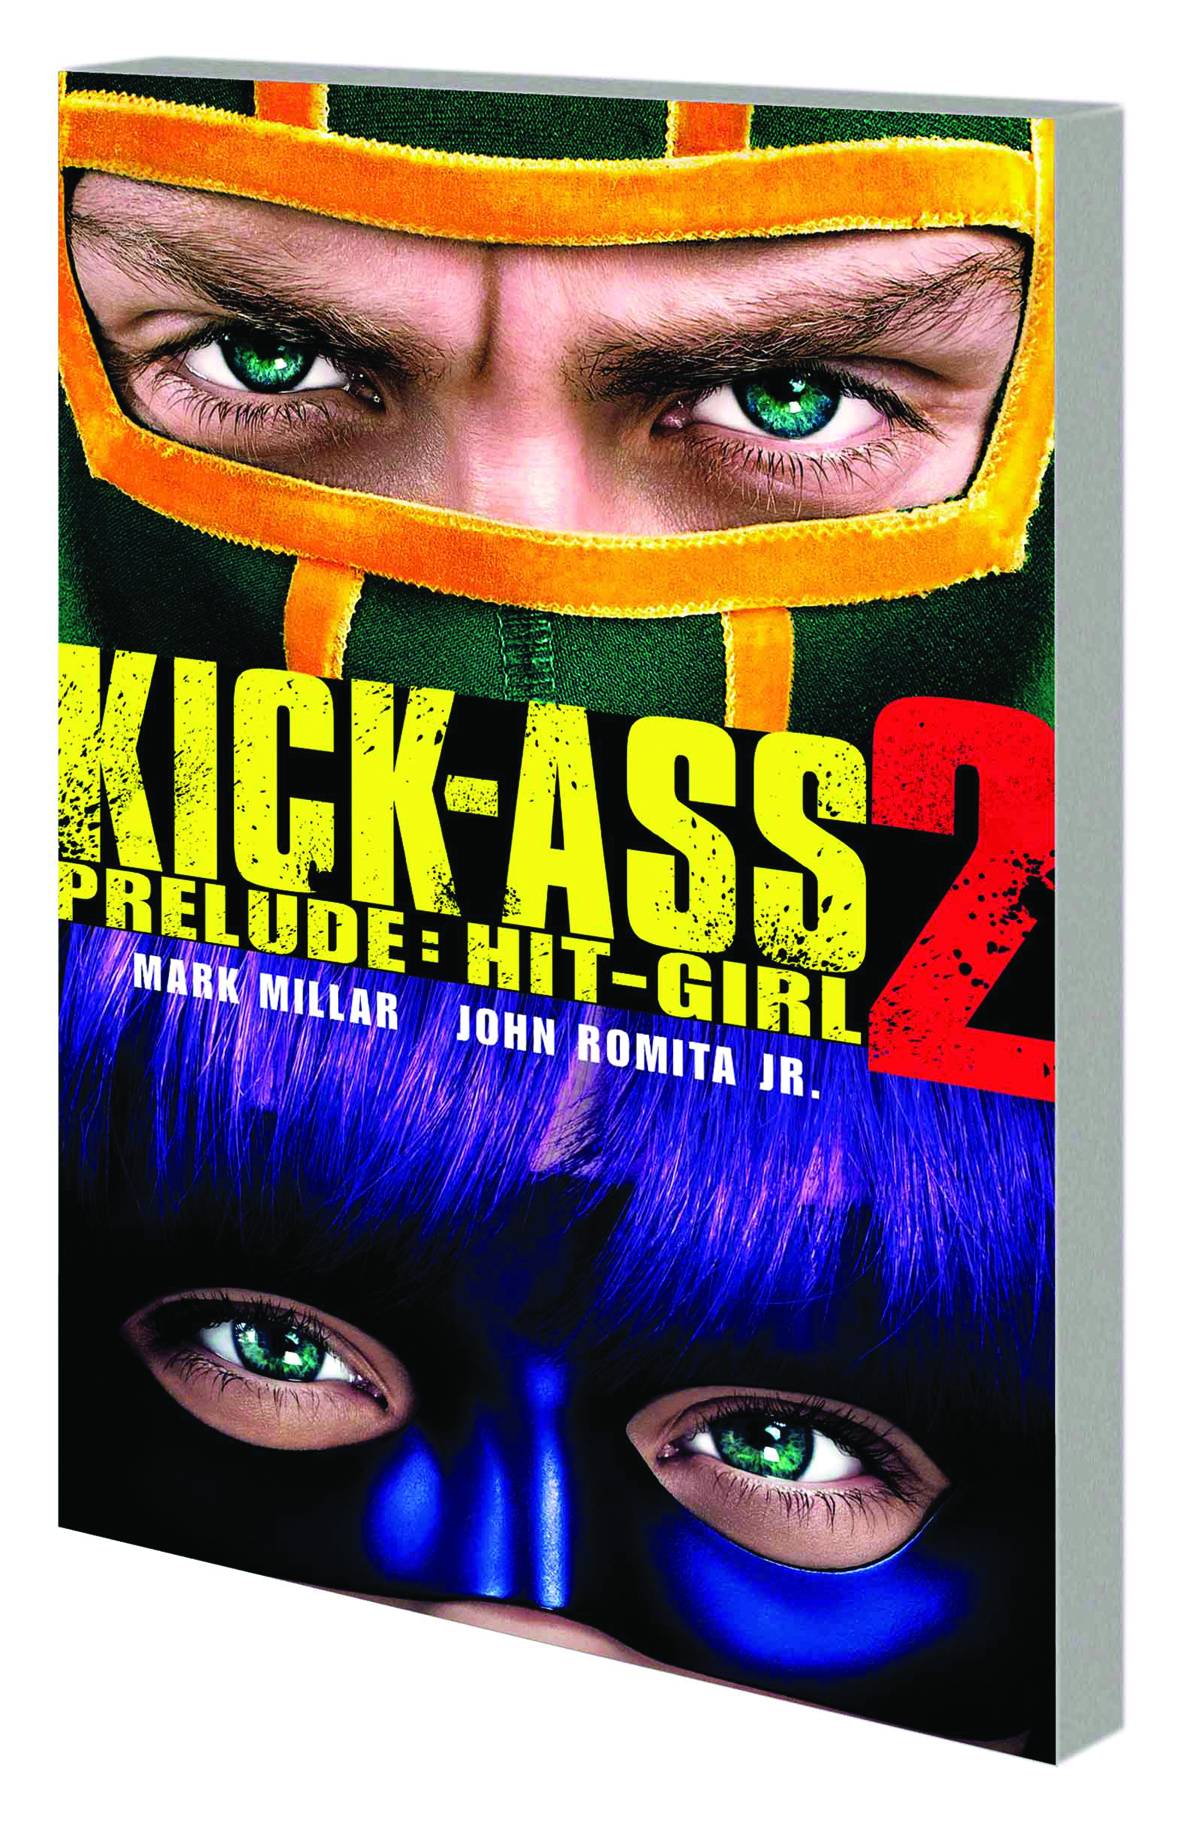 Kick-Ass 2 Prelude Graphic Novel Hit-Girl Movie Cover